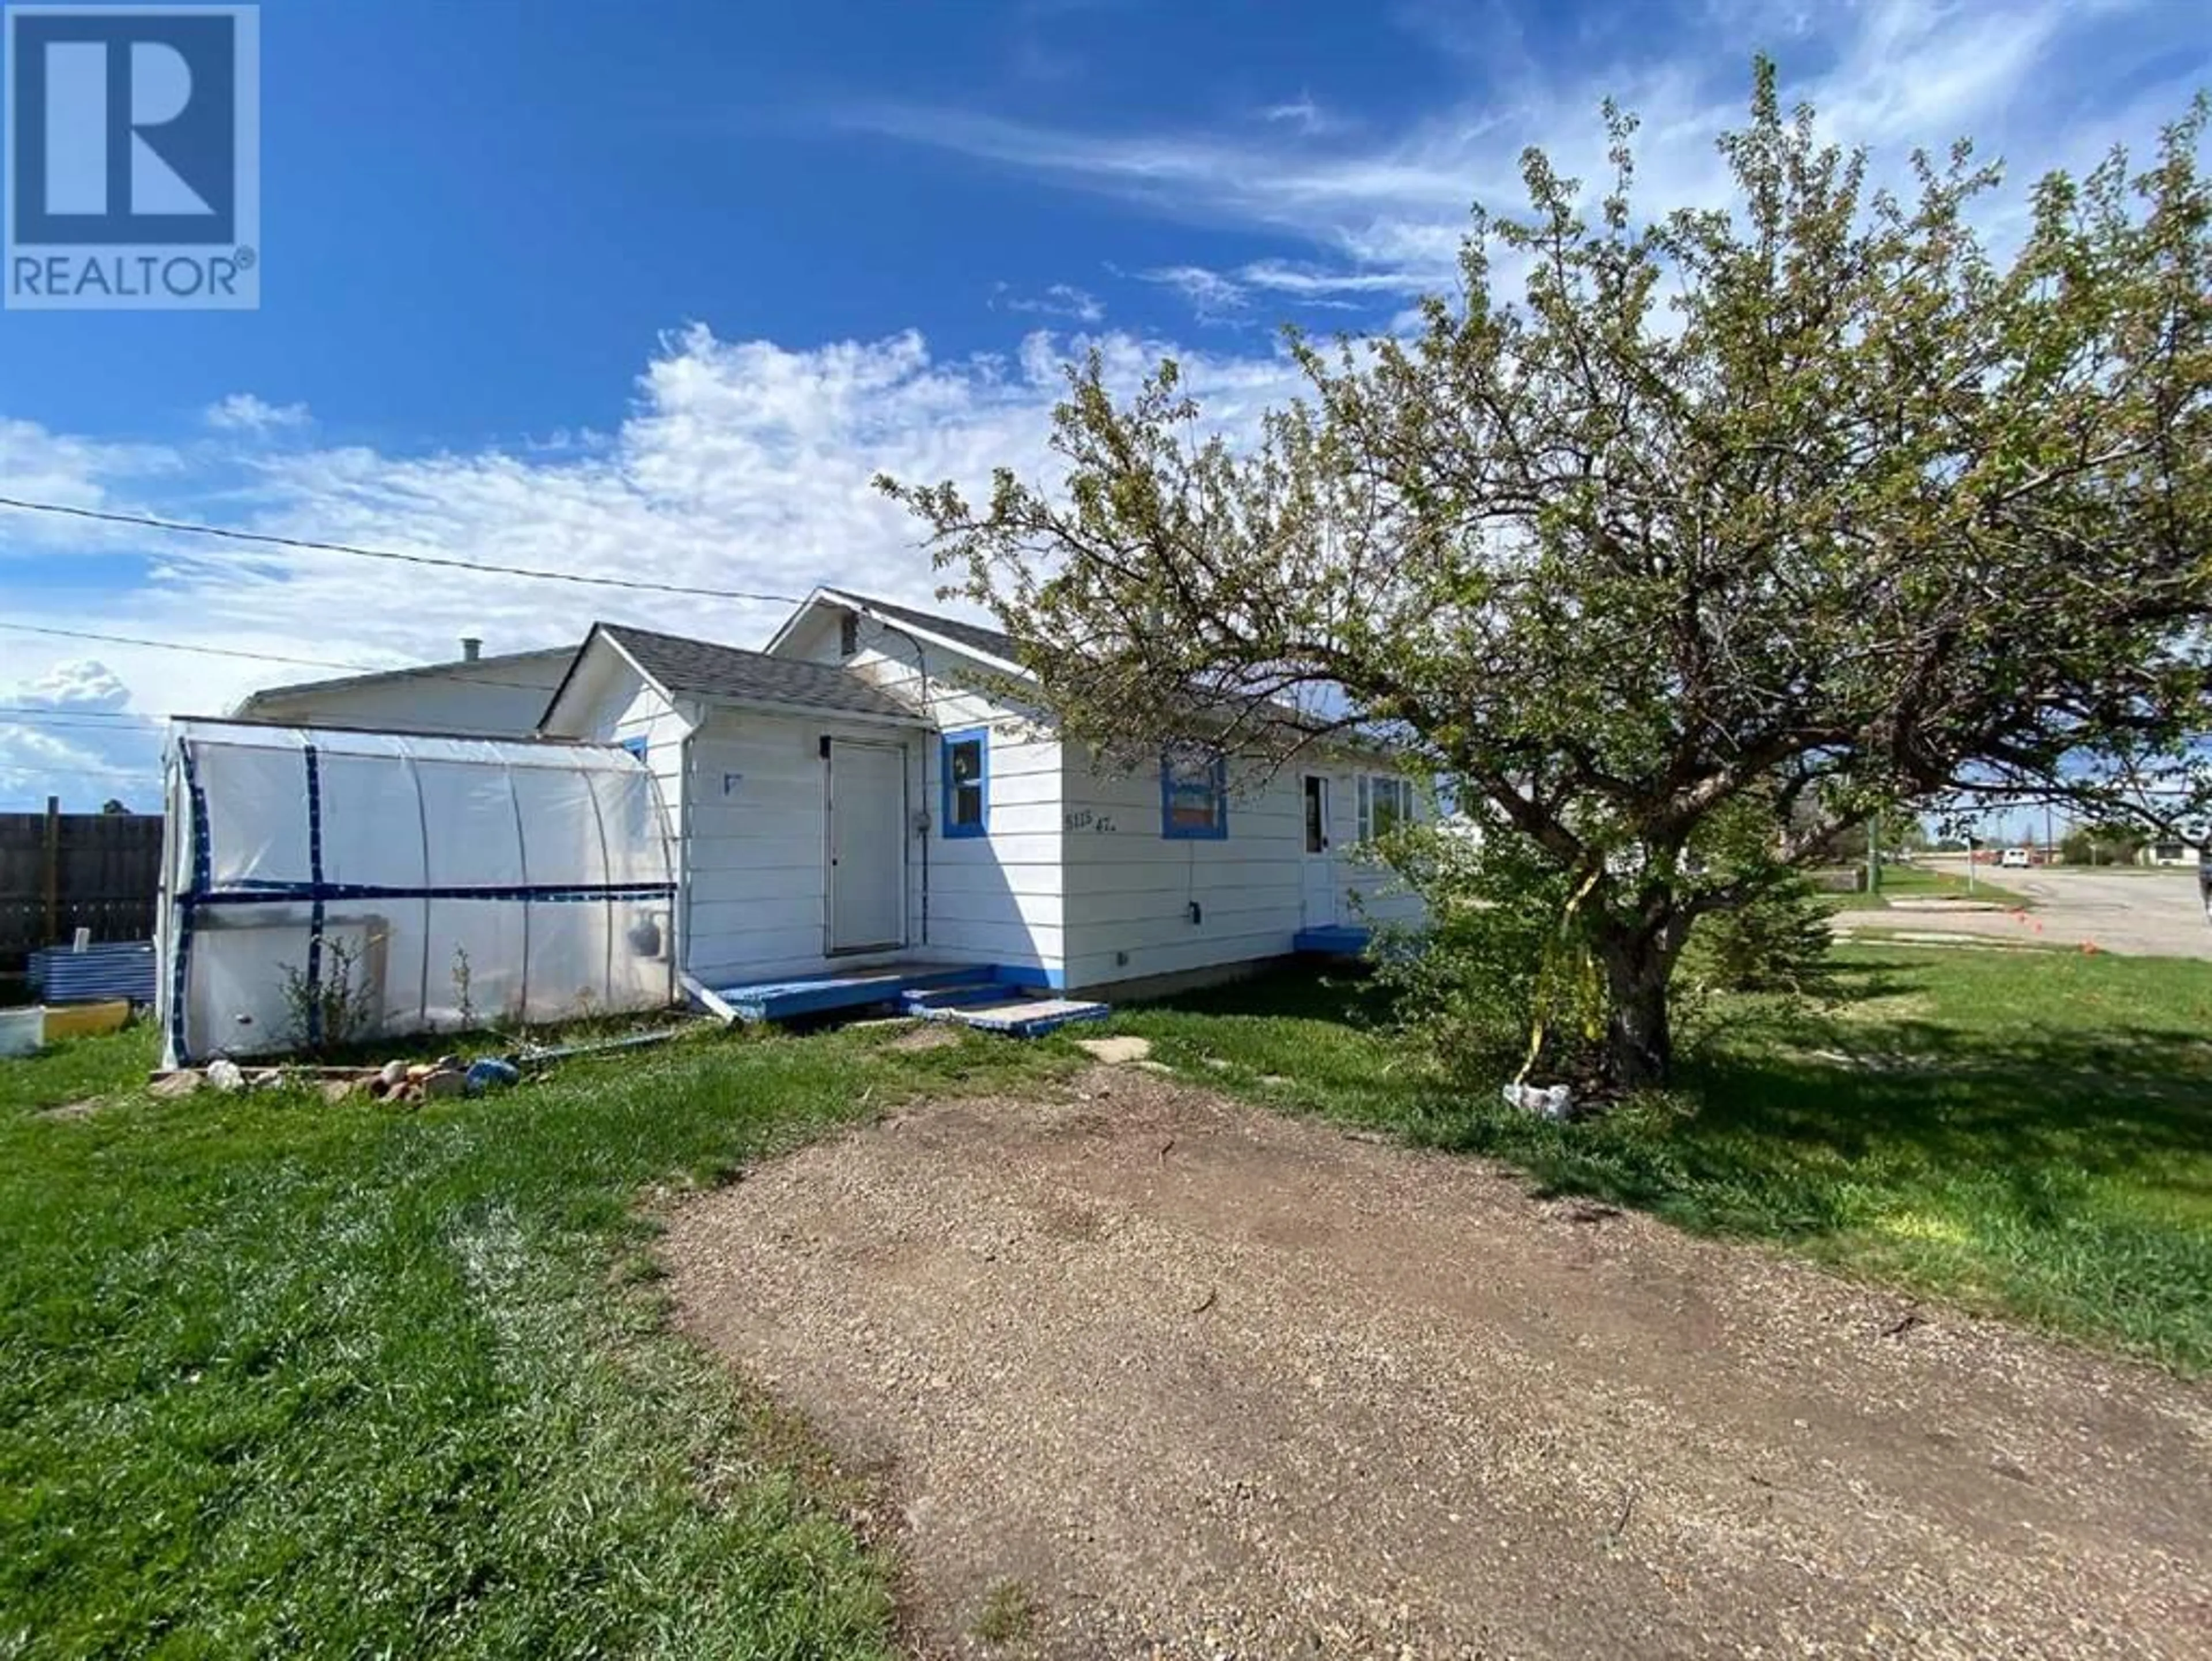 Shed for 5115 47 Avenue, Rycroft Alberta T0H3A0